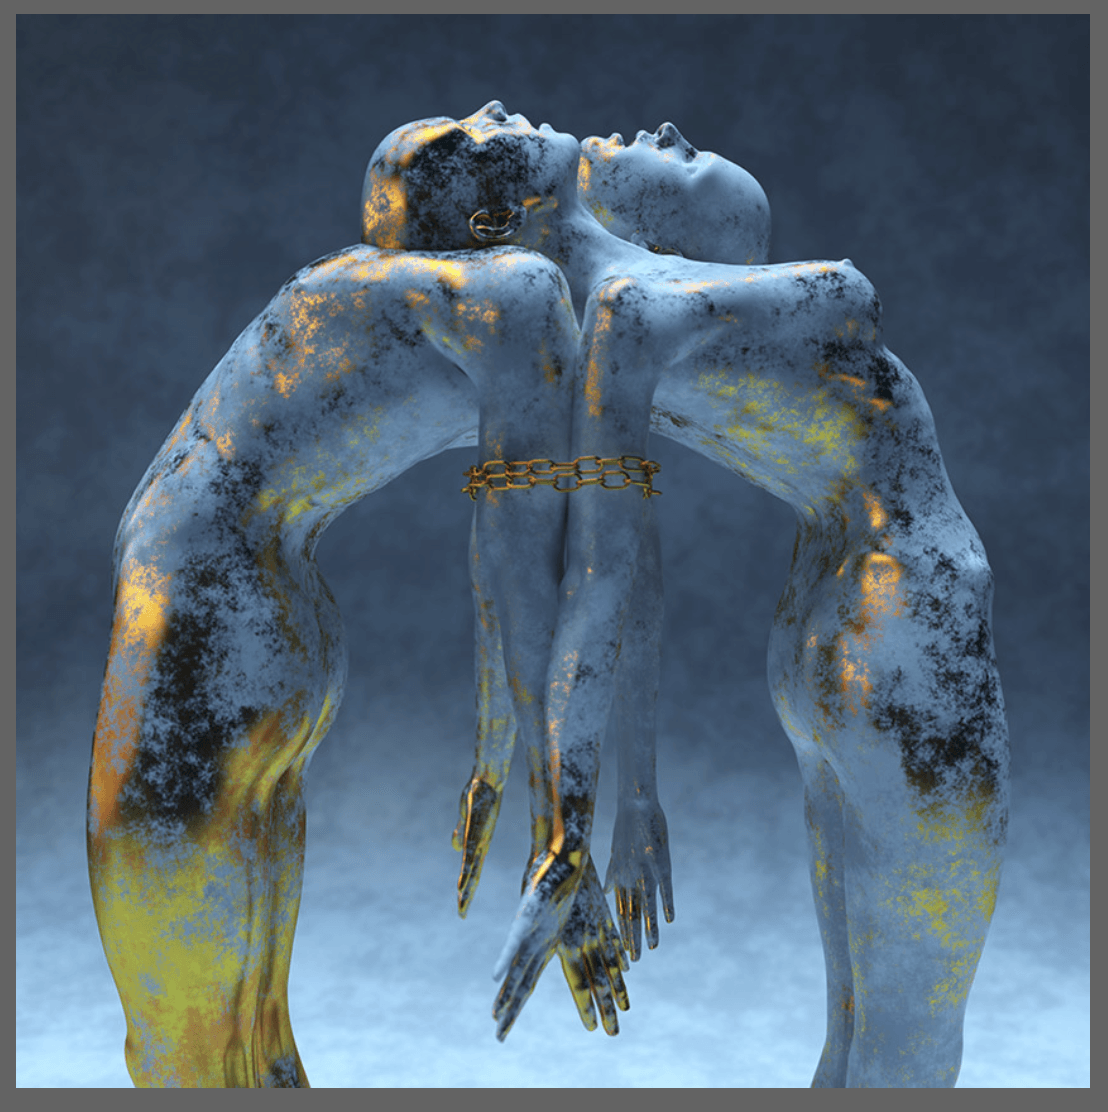 Abstract sculptural portrait of two figures falling back against each other